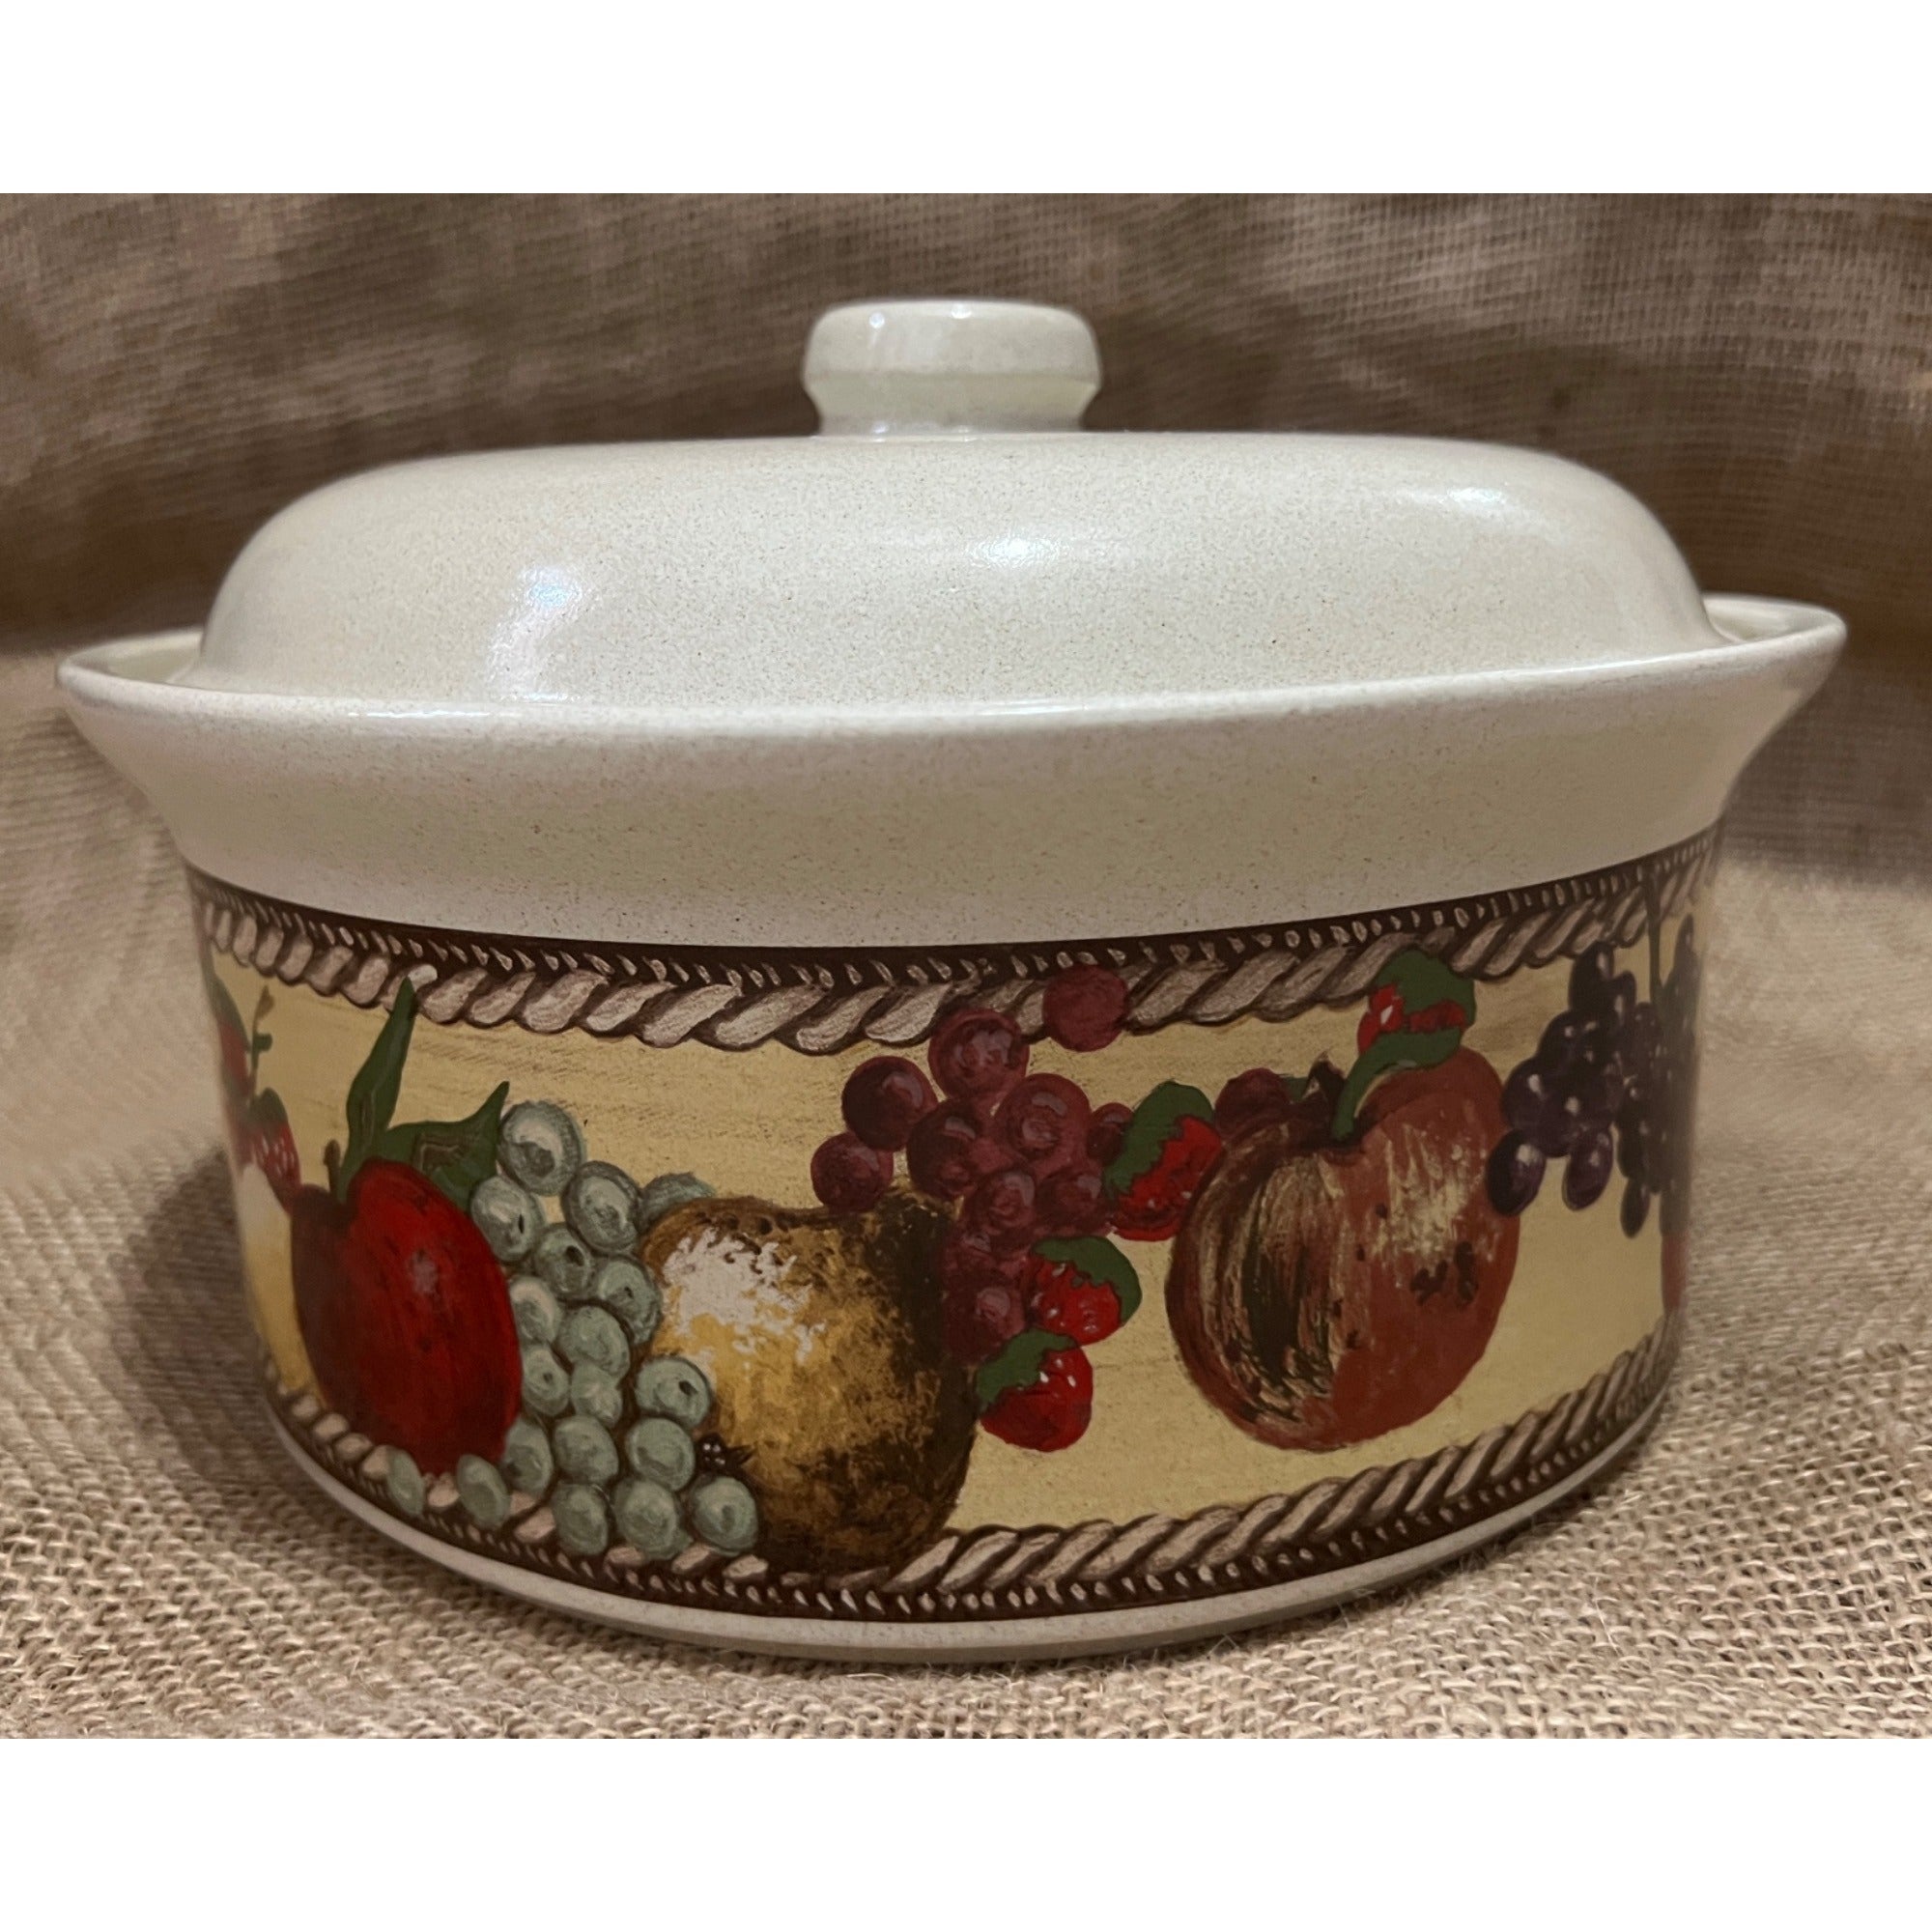 Vintage 3 Quart Clay Casserole Baking Dish with Lid and Fruit